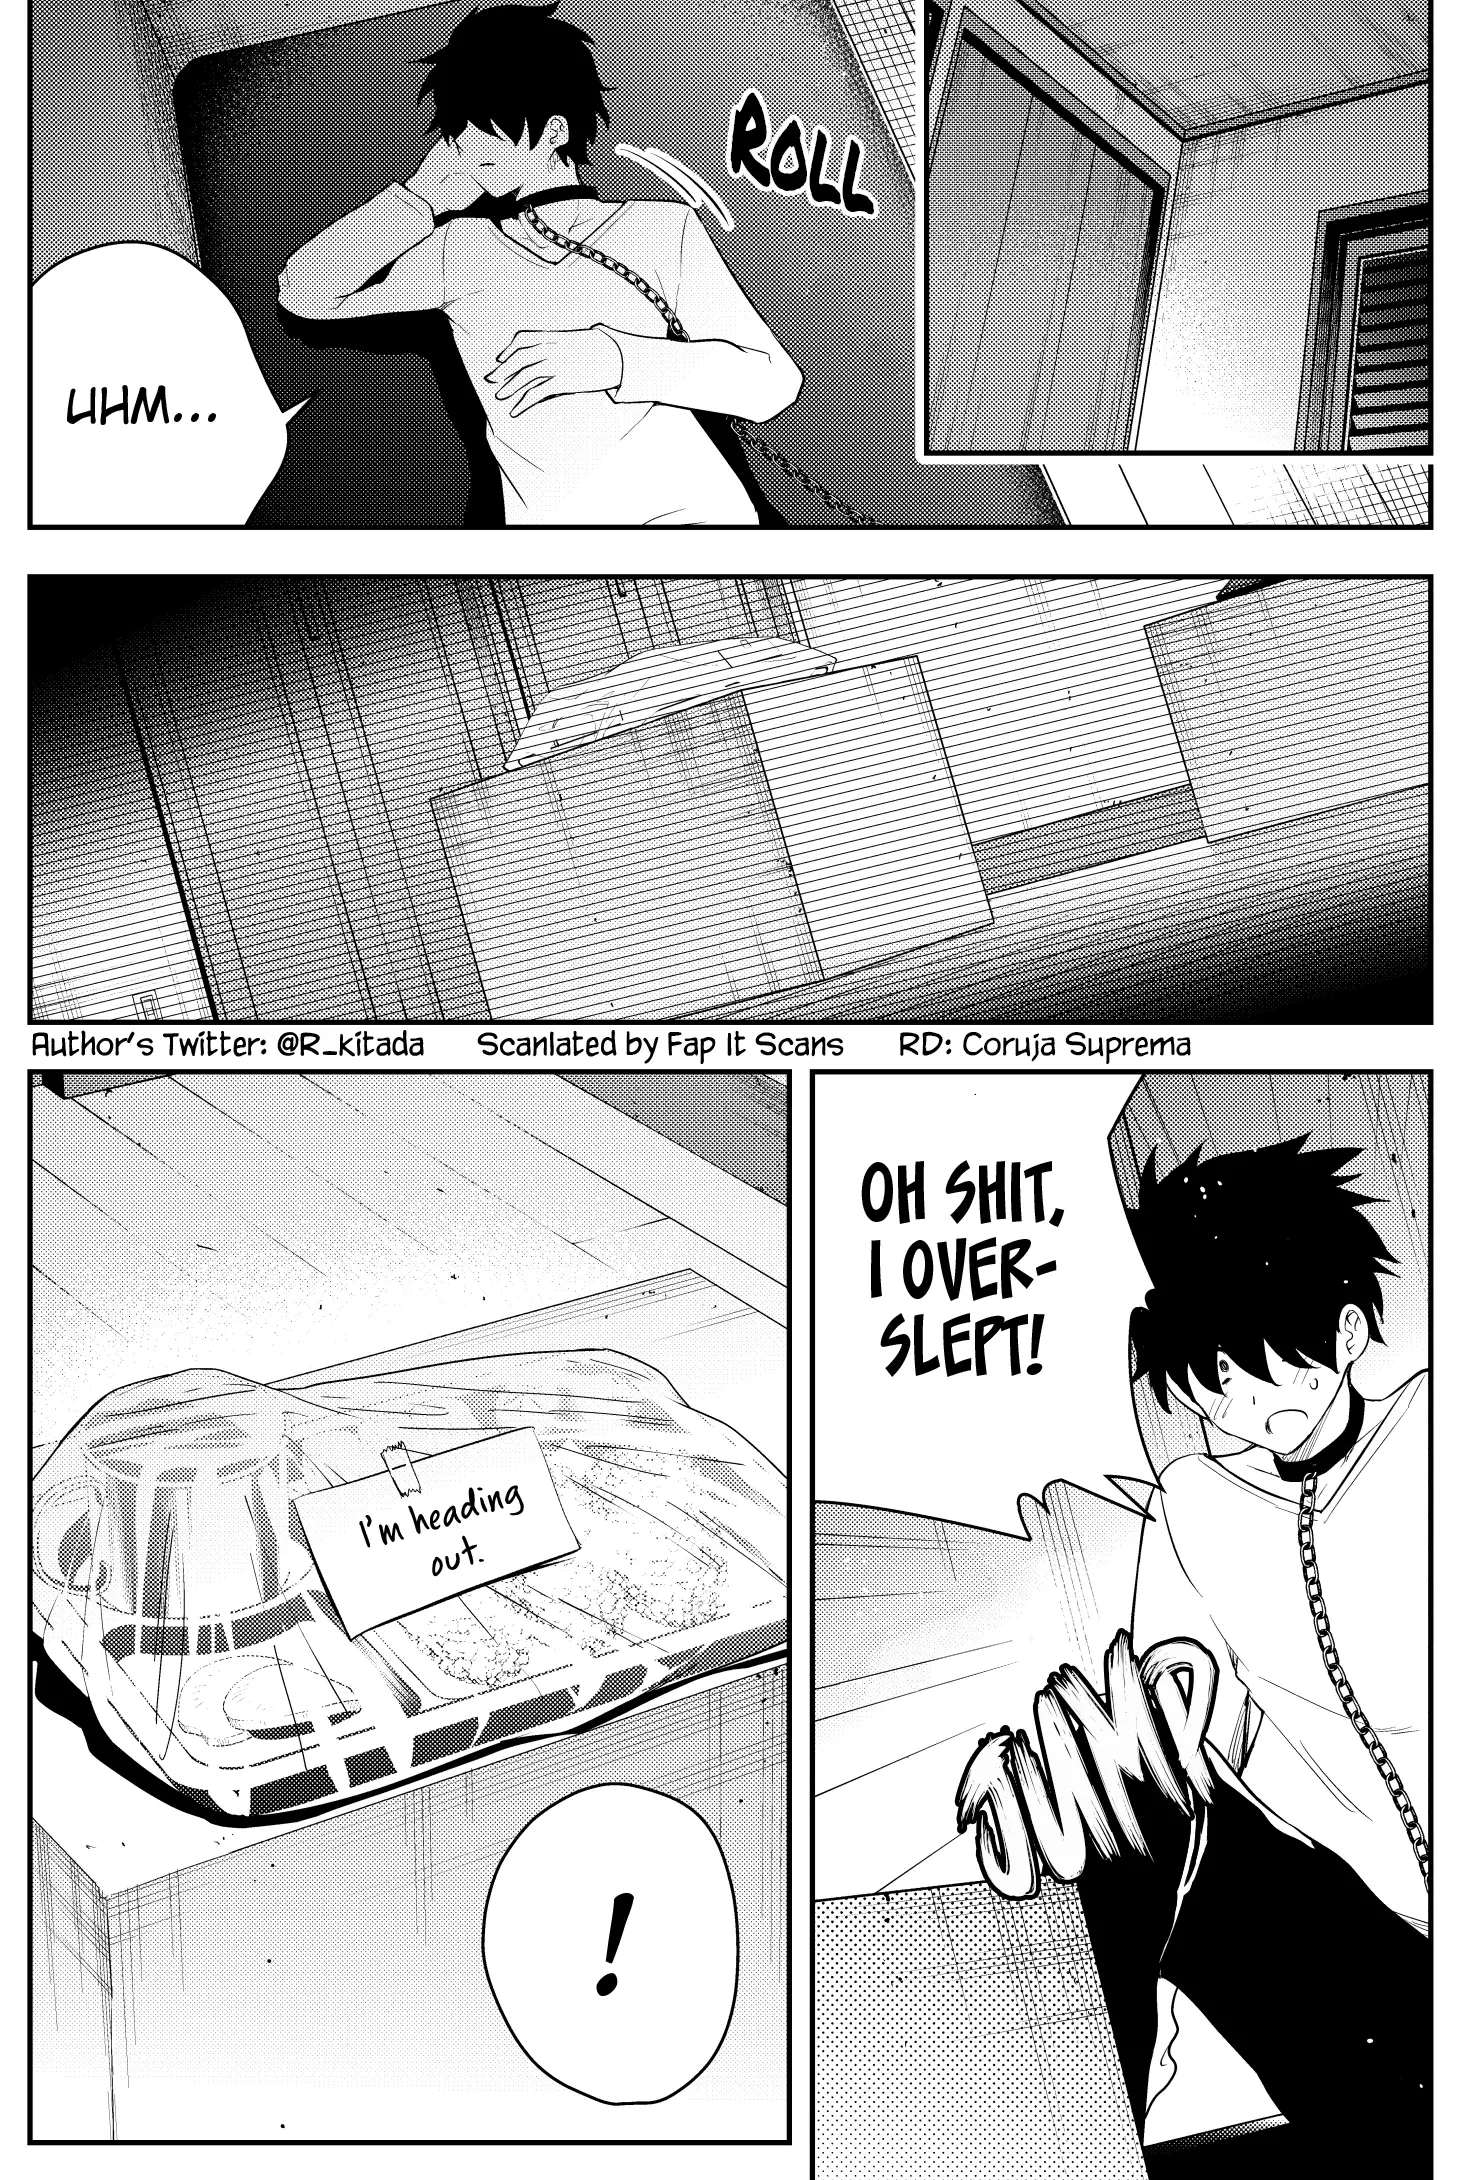 The Story Of A Manga Artist Confined By A Strange High School Girl - 19 page 1-b6143430